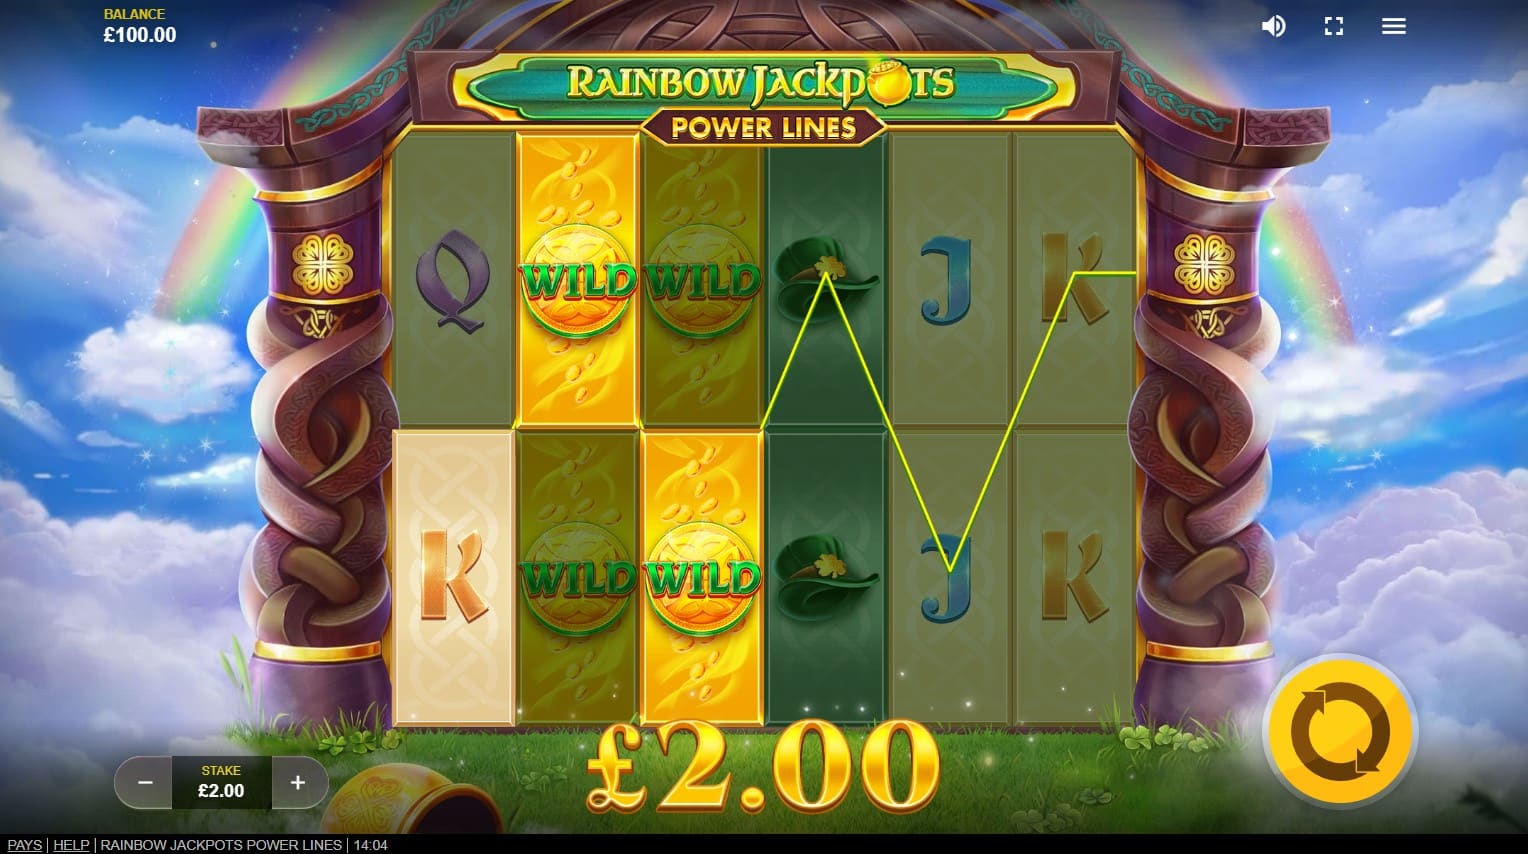 Rainbow Jackpots Power Lines Free Spins